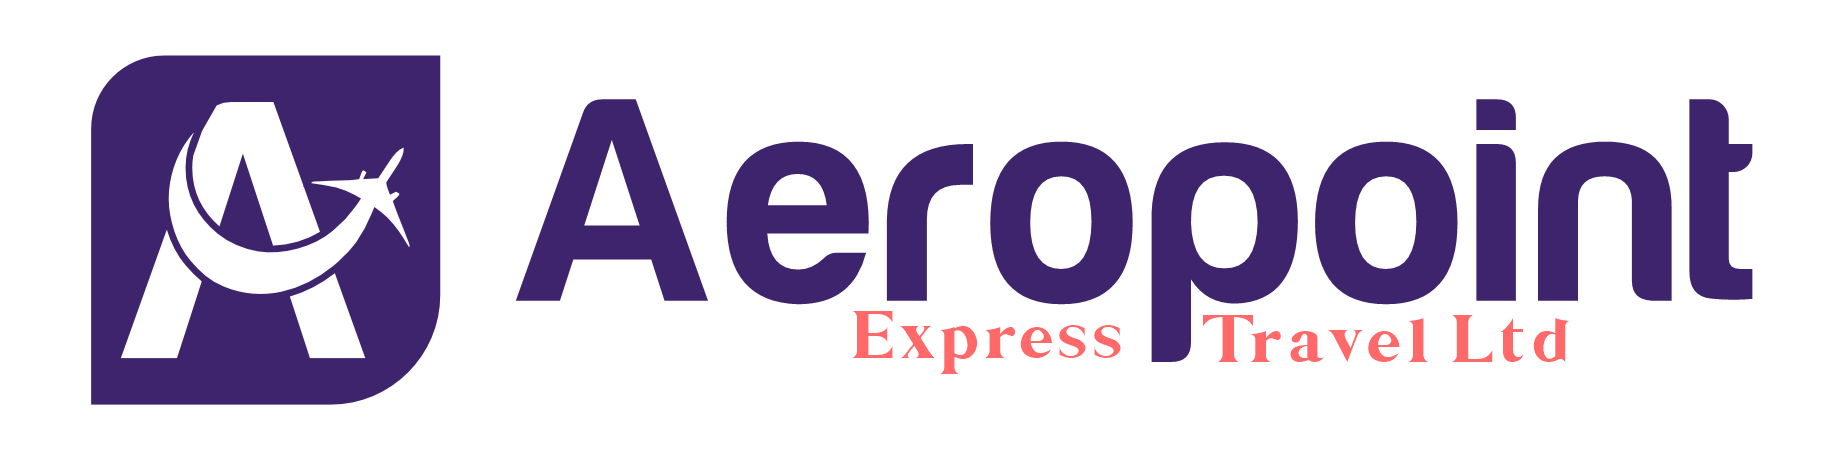 Aeropoint Express Travel Ltd is a leading travel agency in Nigeria